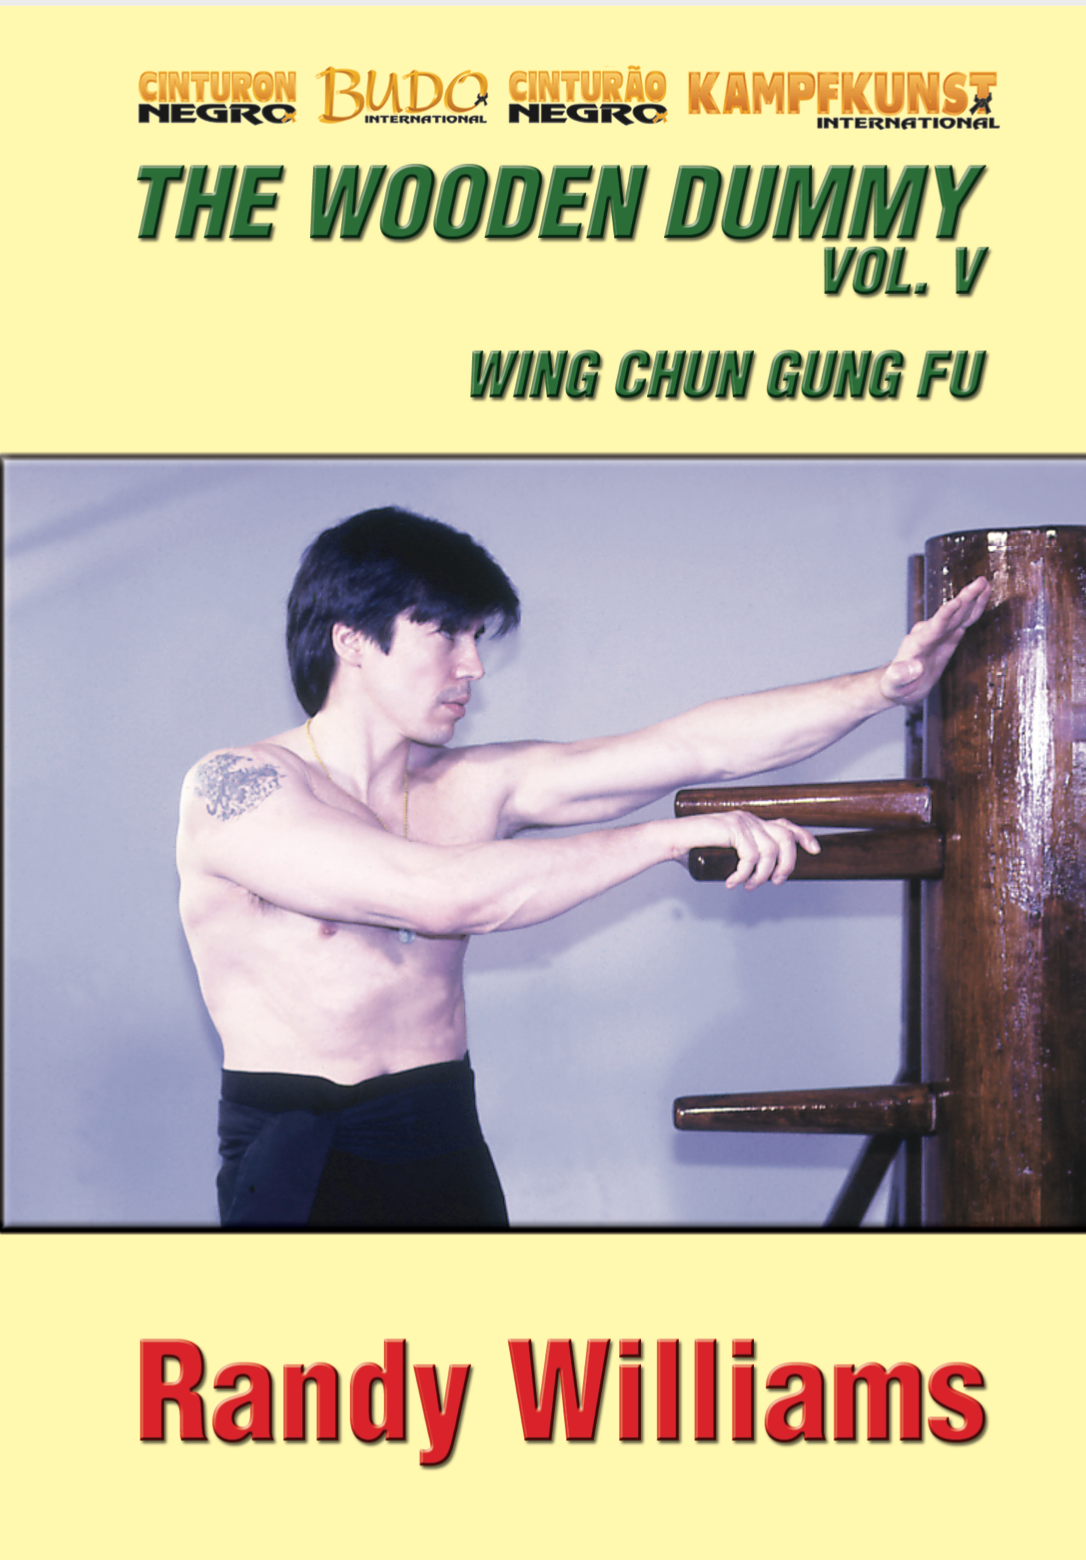 Wing Chun Wooden Dummy Form Basic Drills DVD by Randy Williams - Budovideos